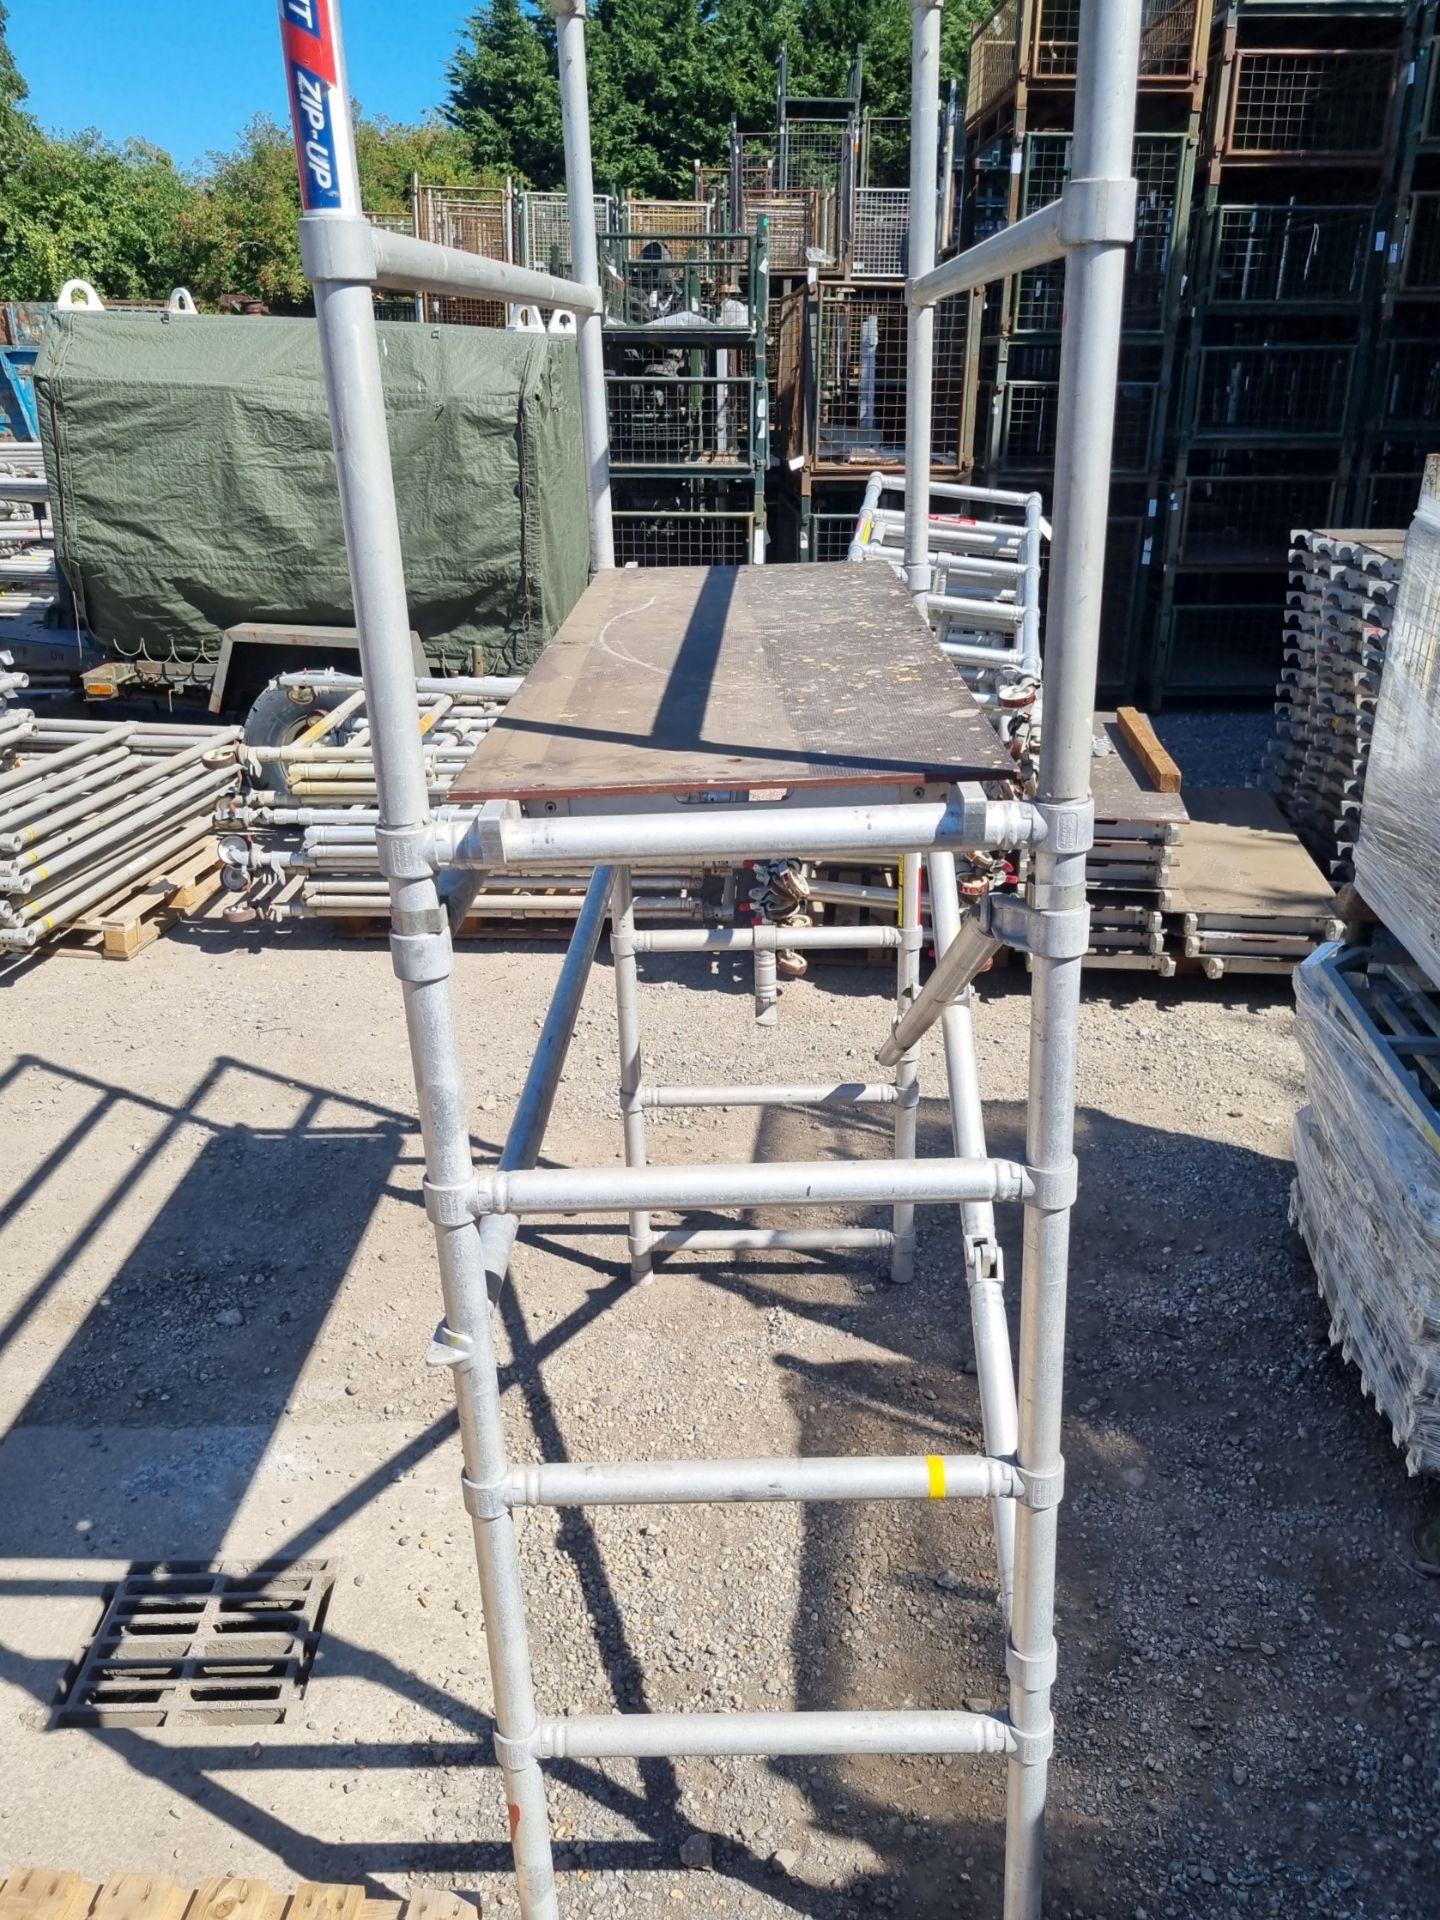 Scaffolding Tower Consisting of - Instant zip-up Scaffold tower platform L200 x W61 x H8.5cm, Instan - Image 5 of 5